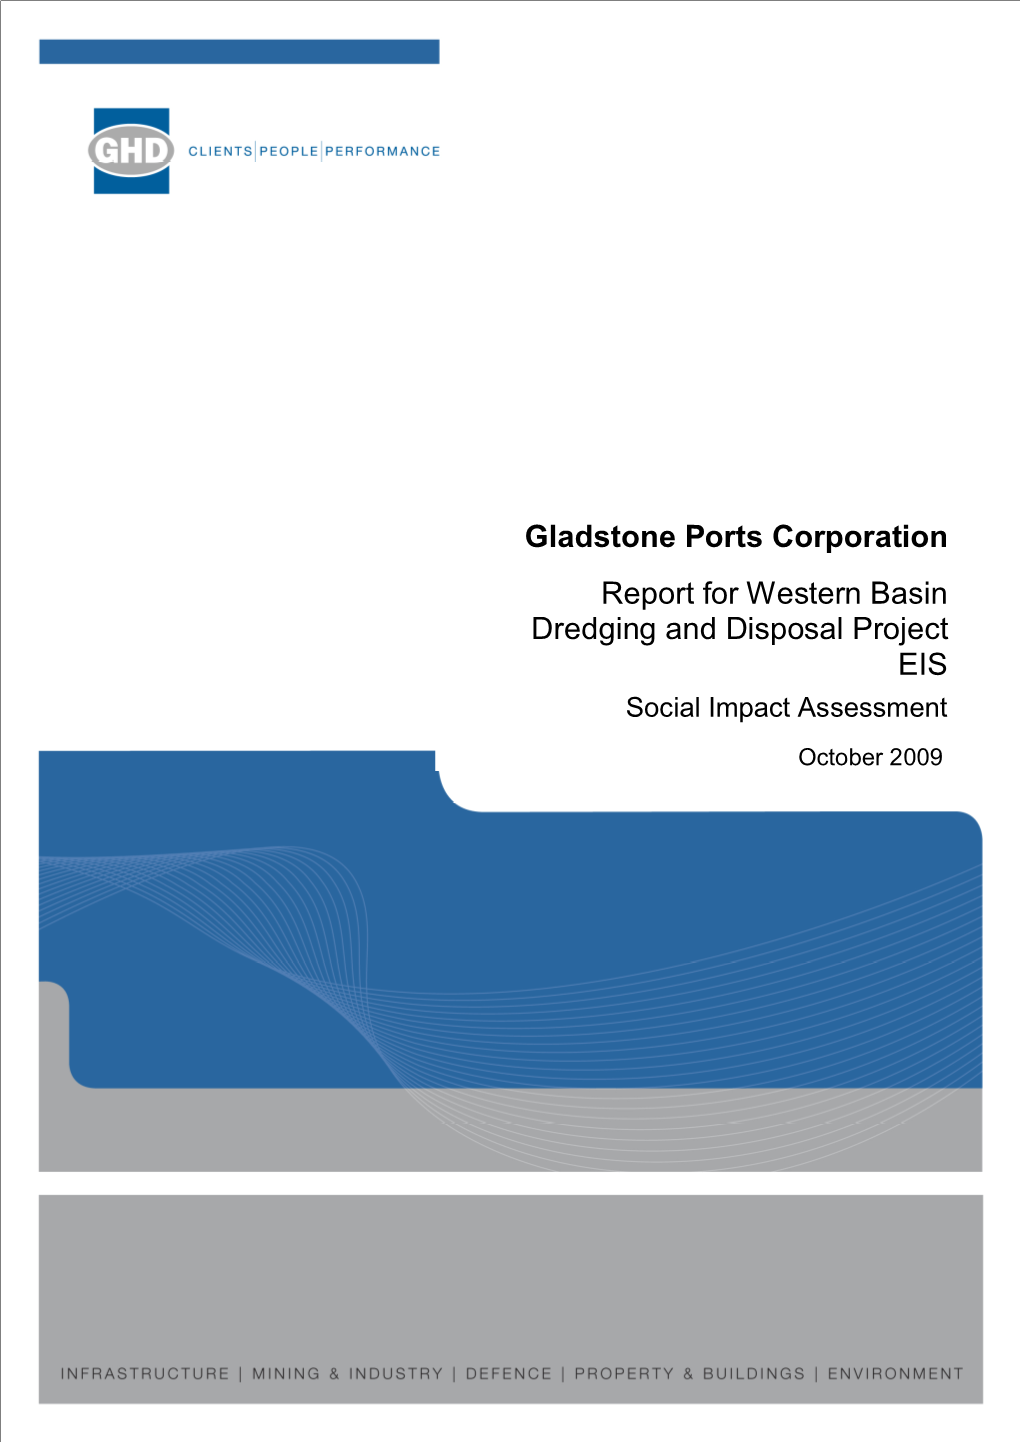 Gladstone Ports Corporation Report for Western Basin Dredging and Disposal Project EIS Social Impact Assessment